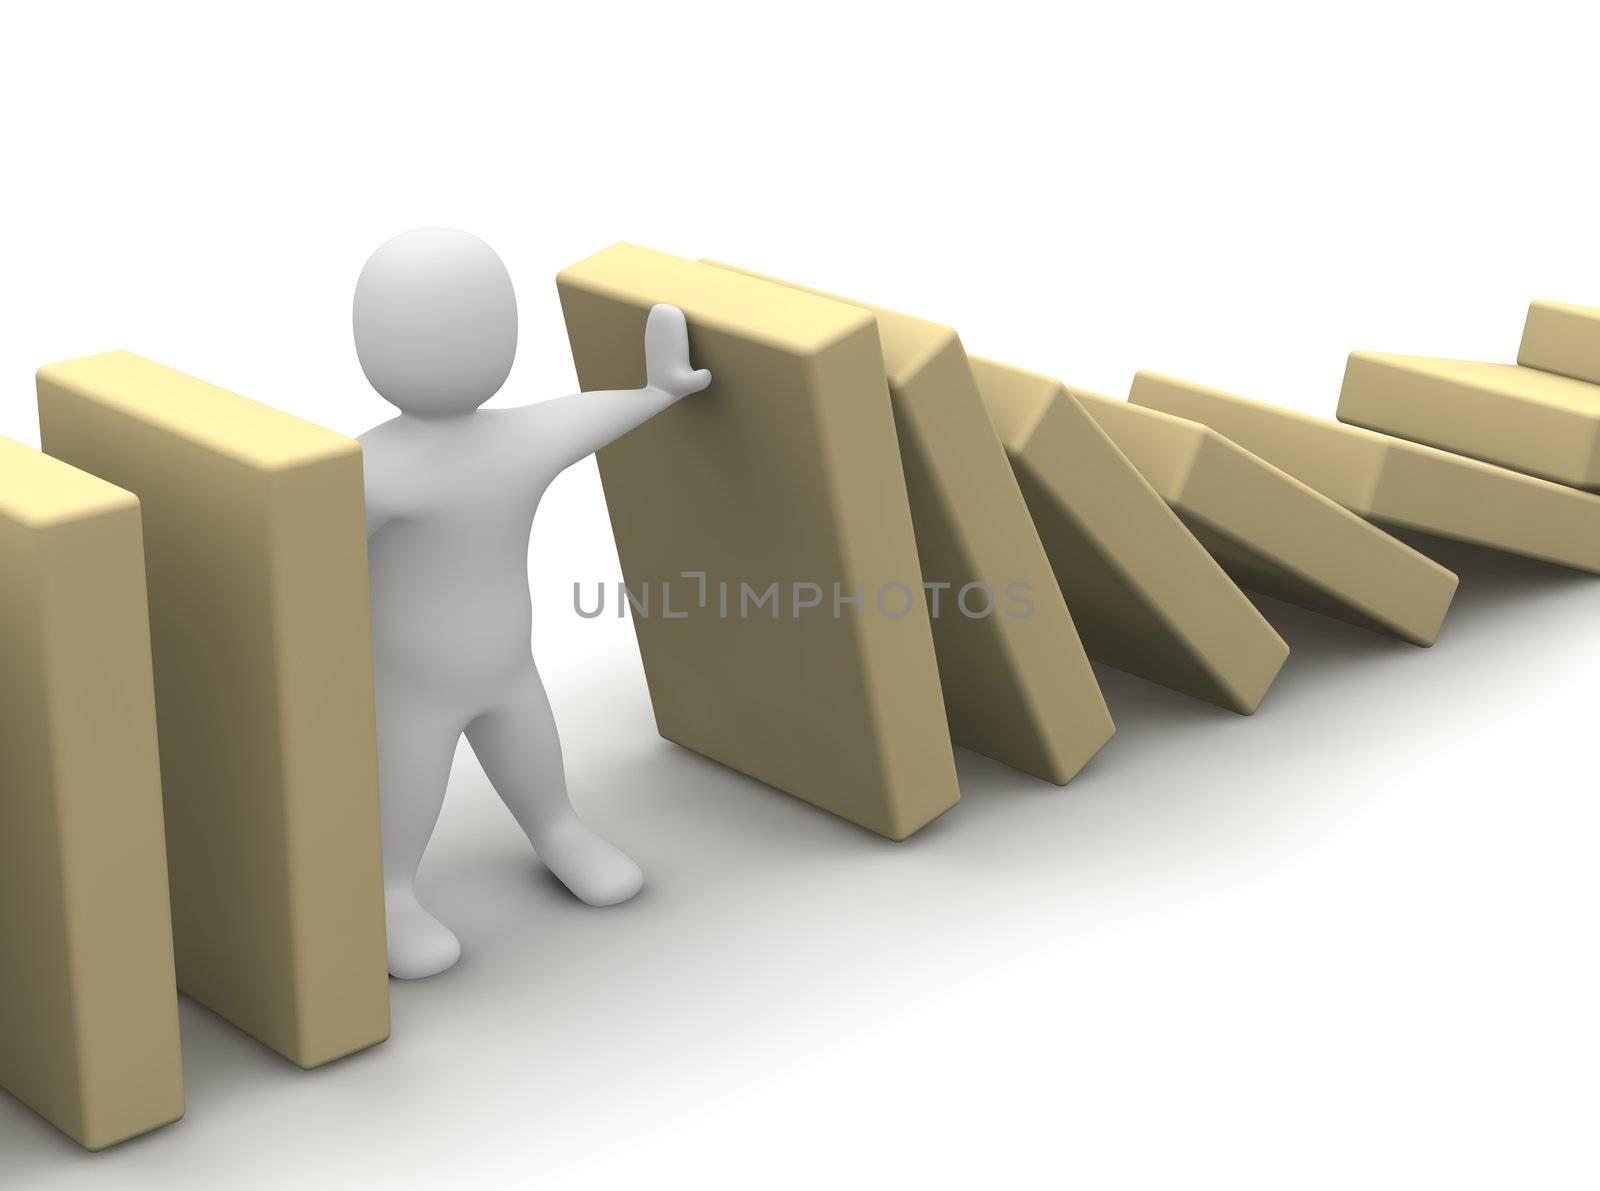 Stopping collaps. 3d rendered illustration isolated on white.